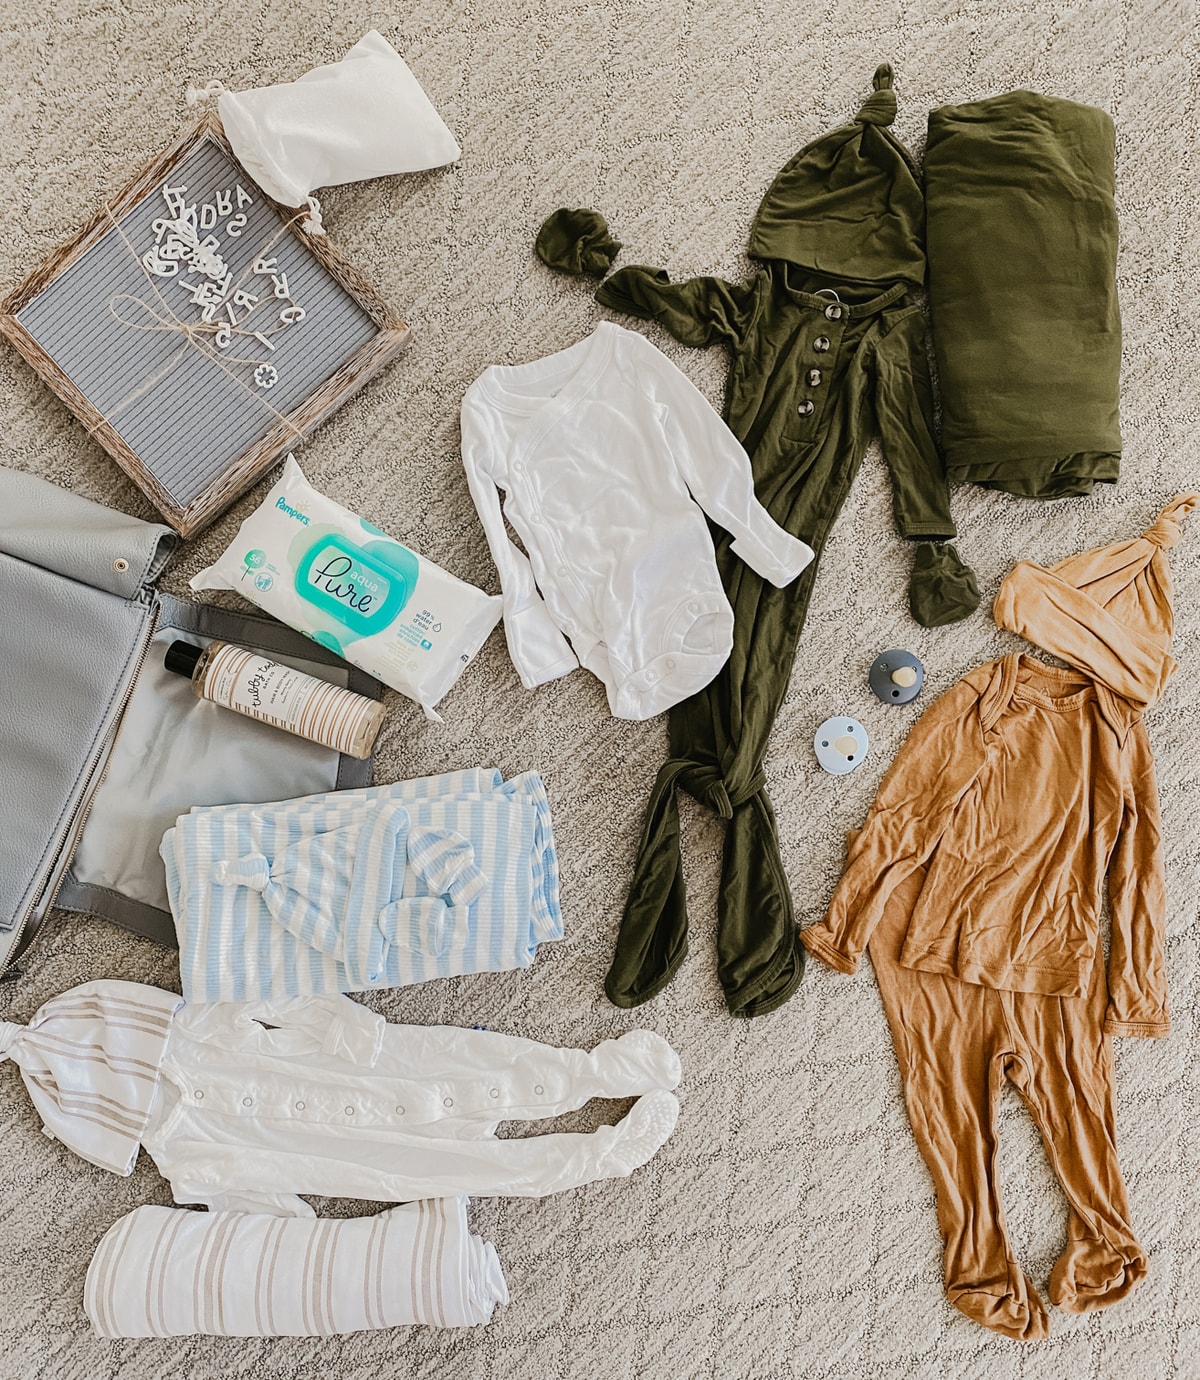 Hospital Bag Checklist: What to Pack in Your Hospital Bag — Anna